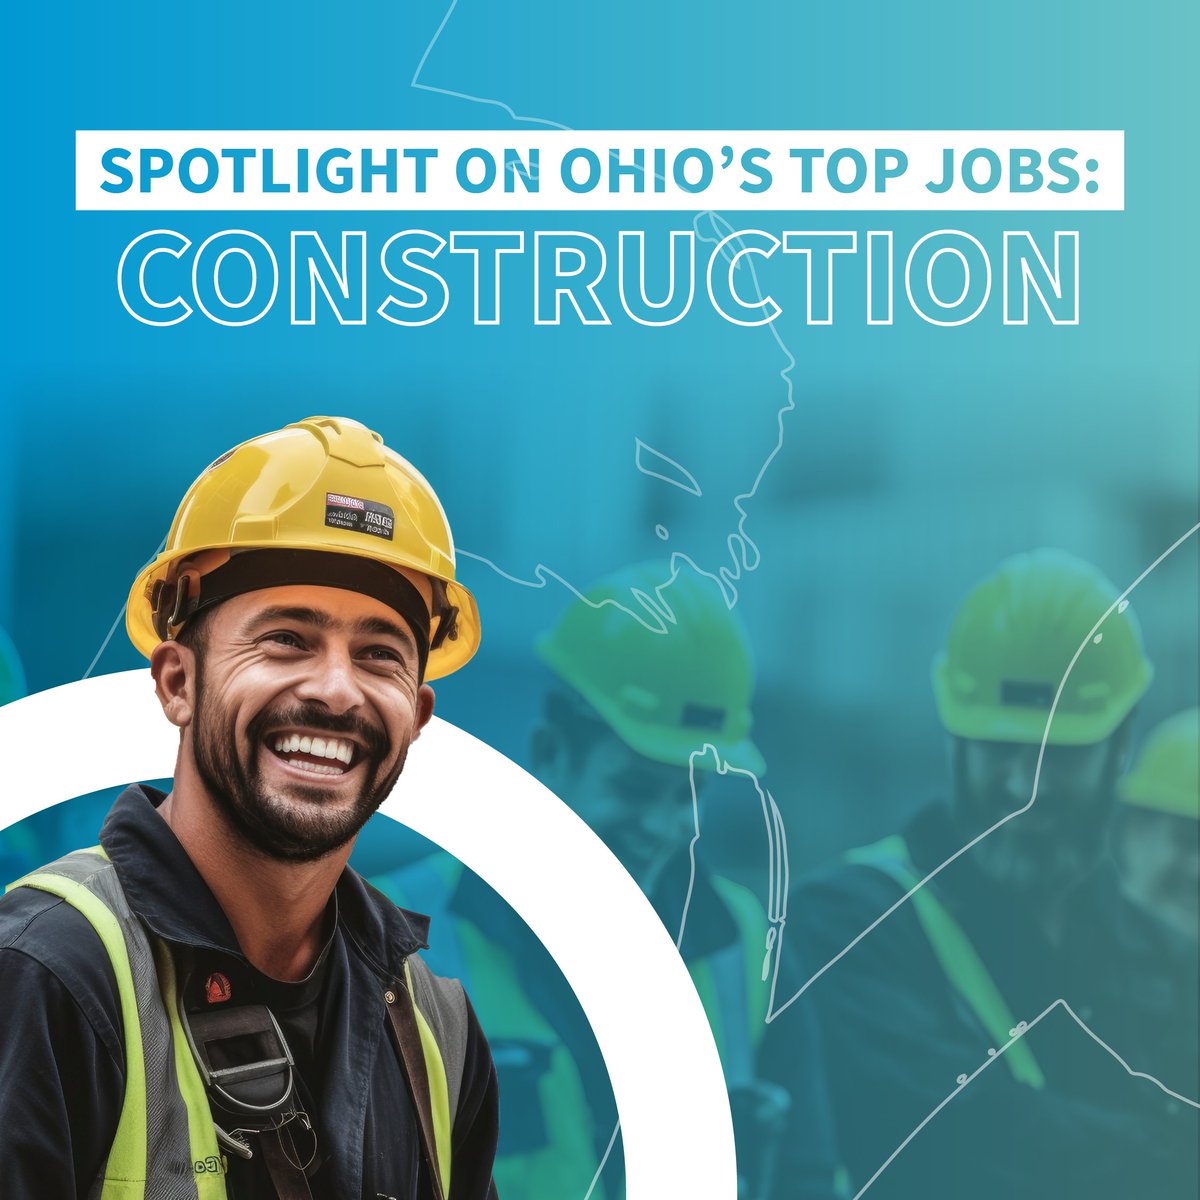 Schedule an appointment to use one of our virtual reality (VR) headsets to experience what it’s like to work as a line worker or electrician, rebuild a communication tower, drill an underground system for broadband, and more! loom.ly/QzeflOU #OhioMeansJobs